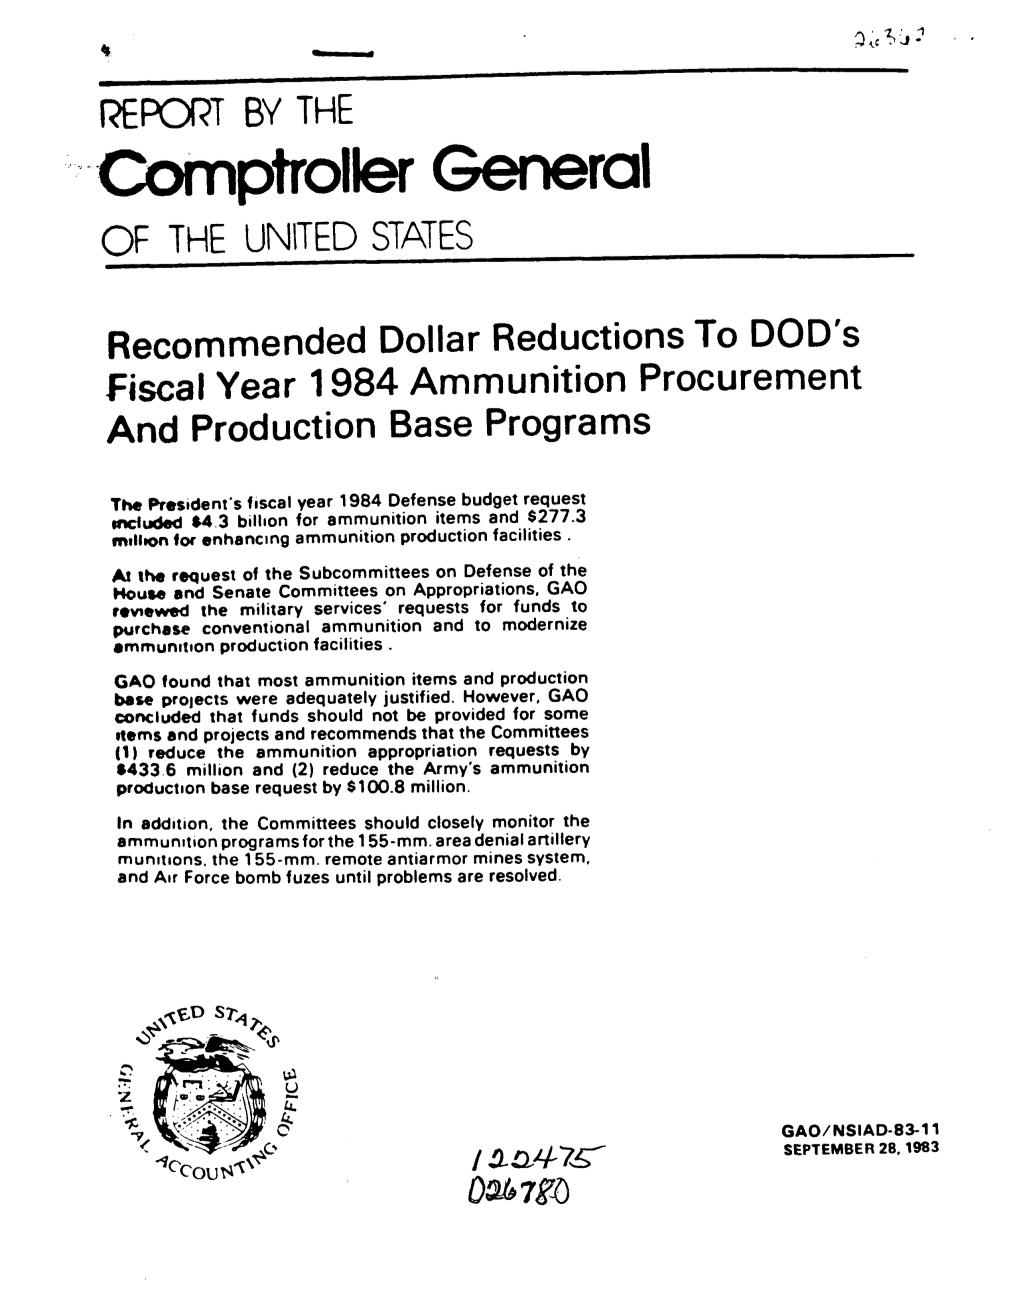 NSIAD-83-11 Recommended Dollar Reductions to DOD's FY 1984